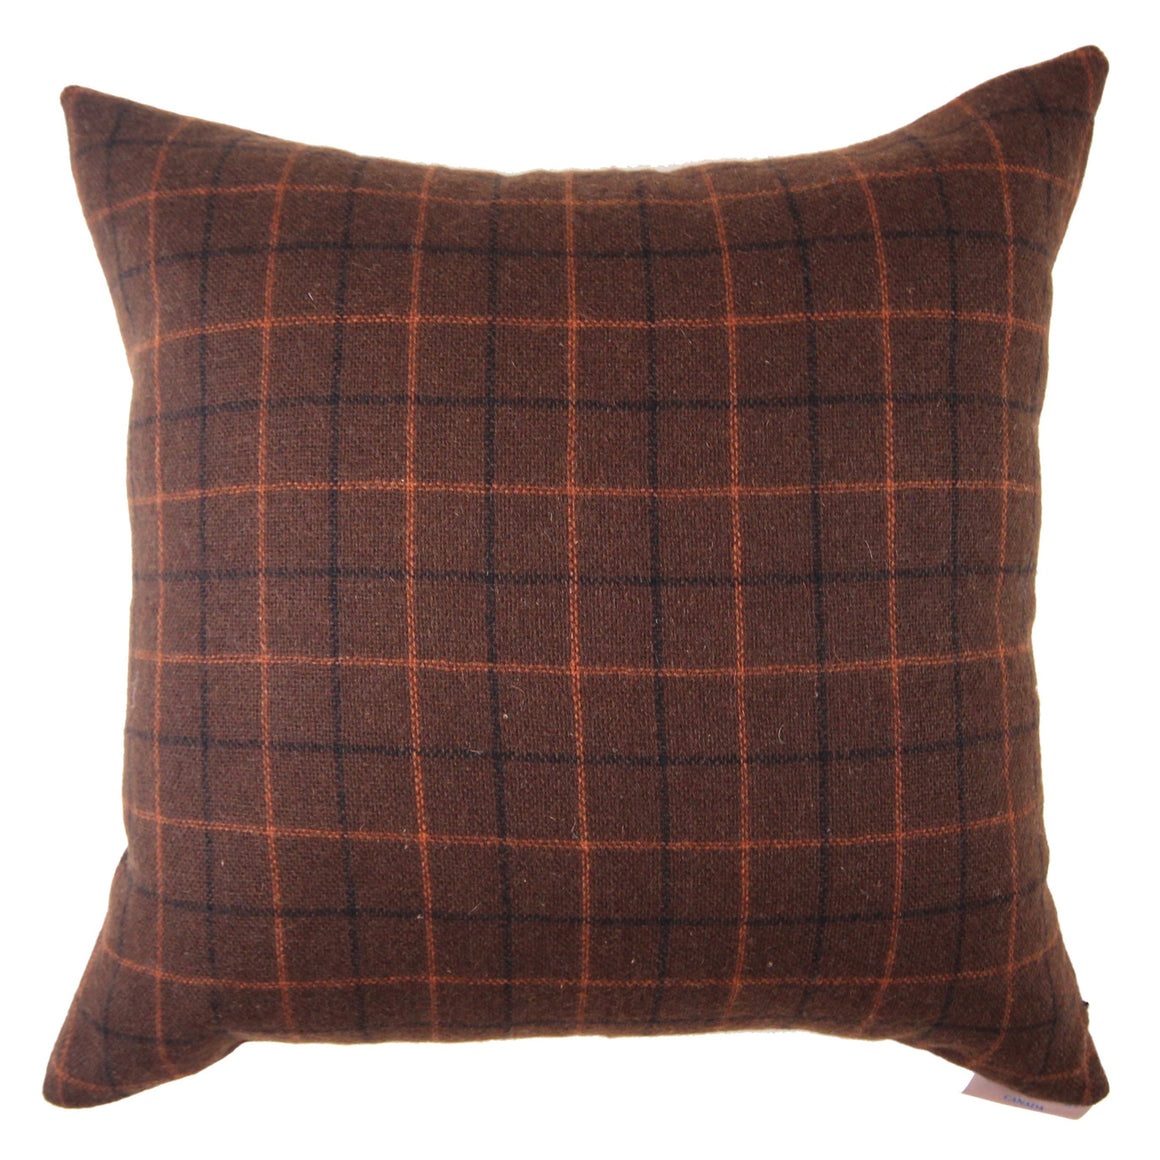 London - Brown and Orange Wool Plaid Pillow Cover - 20x20 - Maa-Kal Boutique Canada